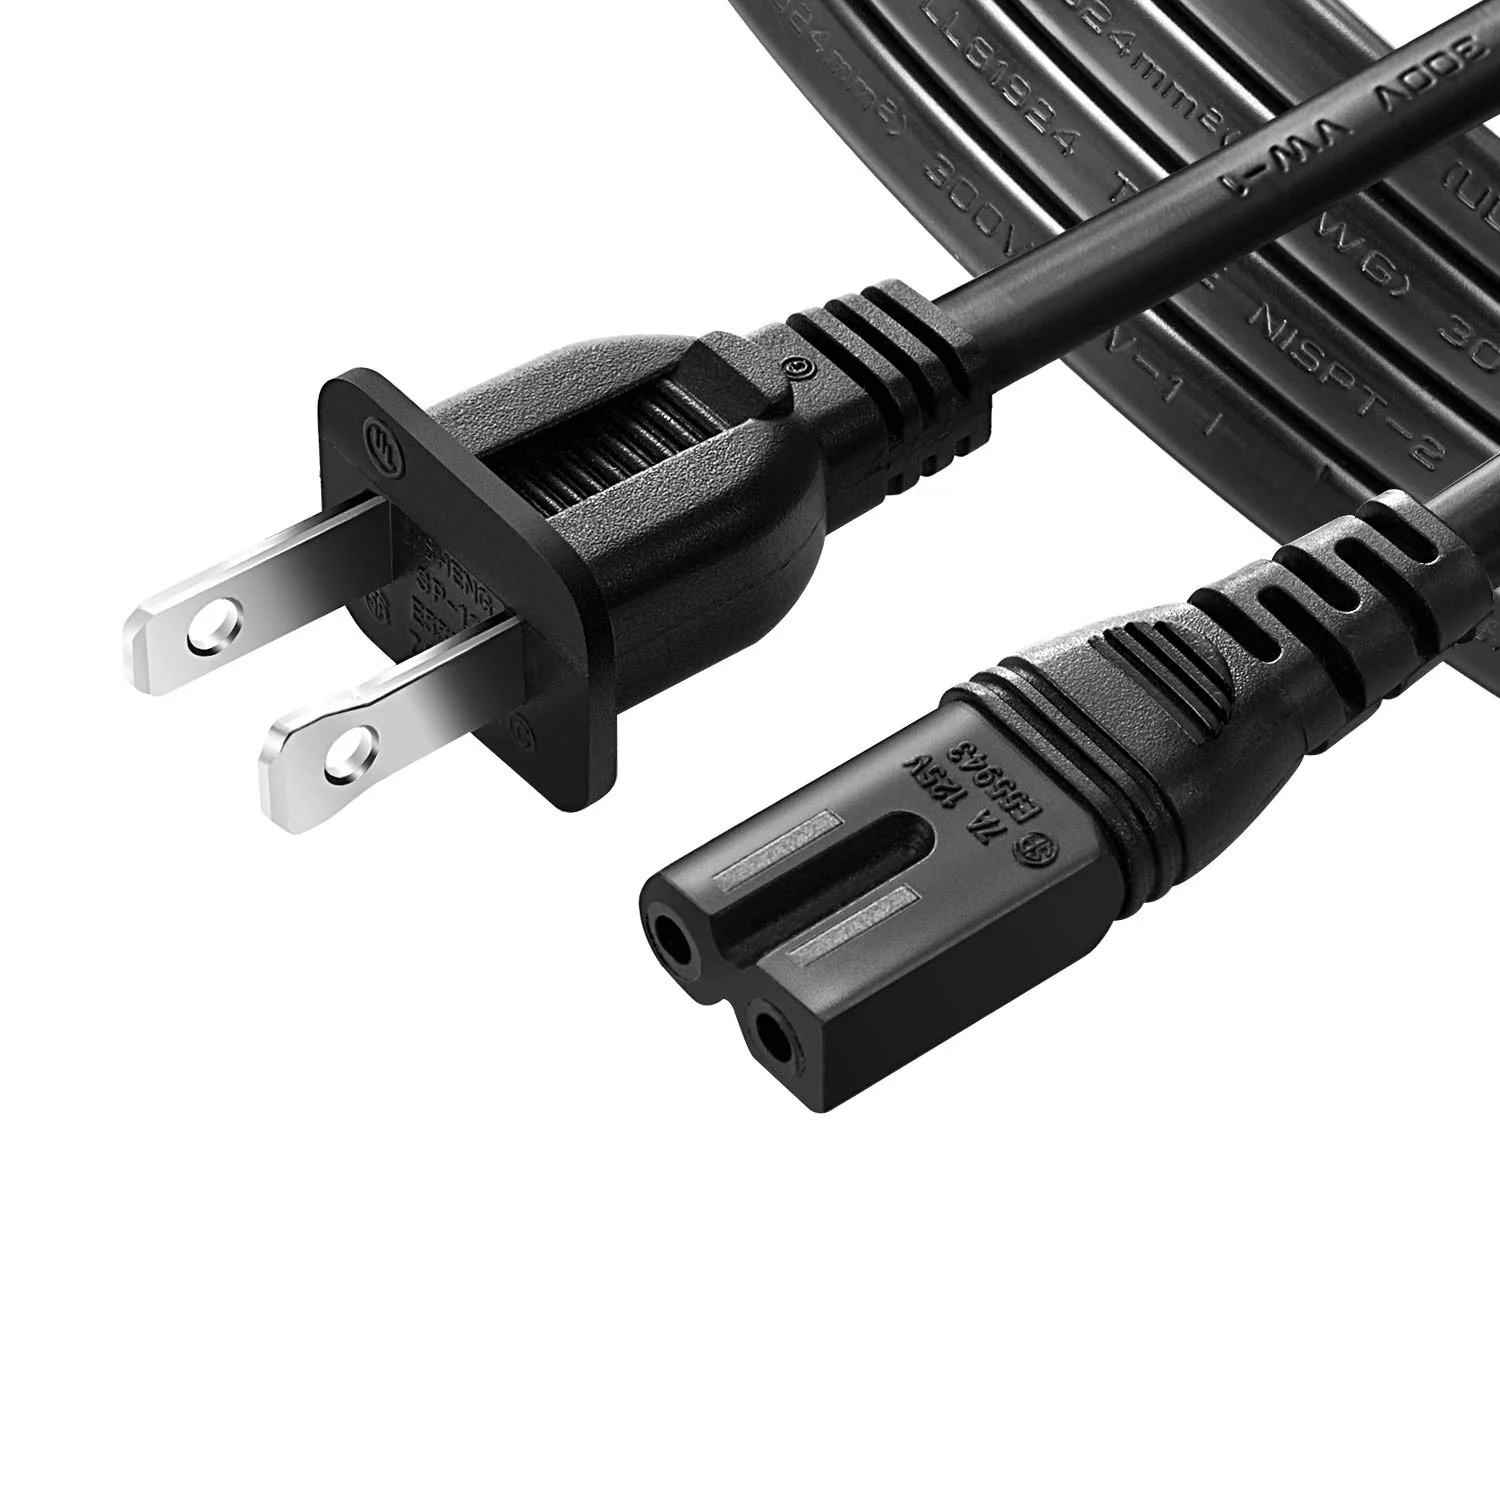 Where To Purchase Replacement Electrical Cord For LG LED TV